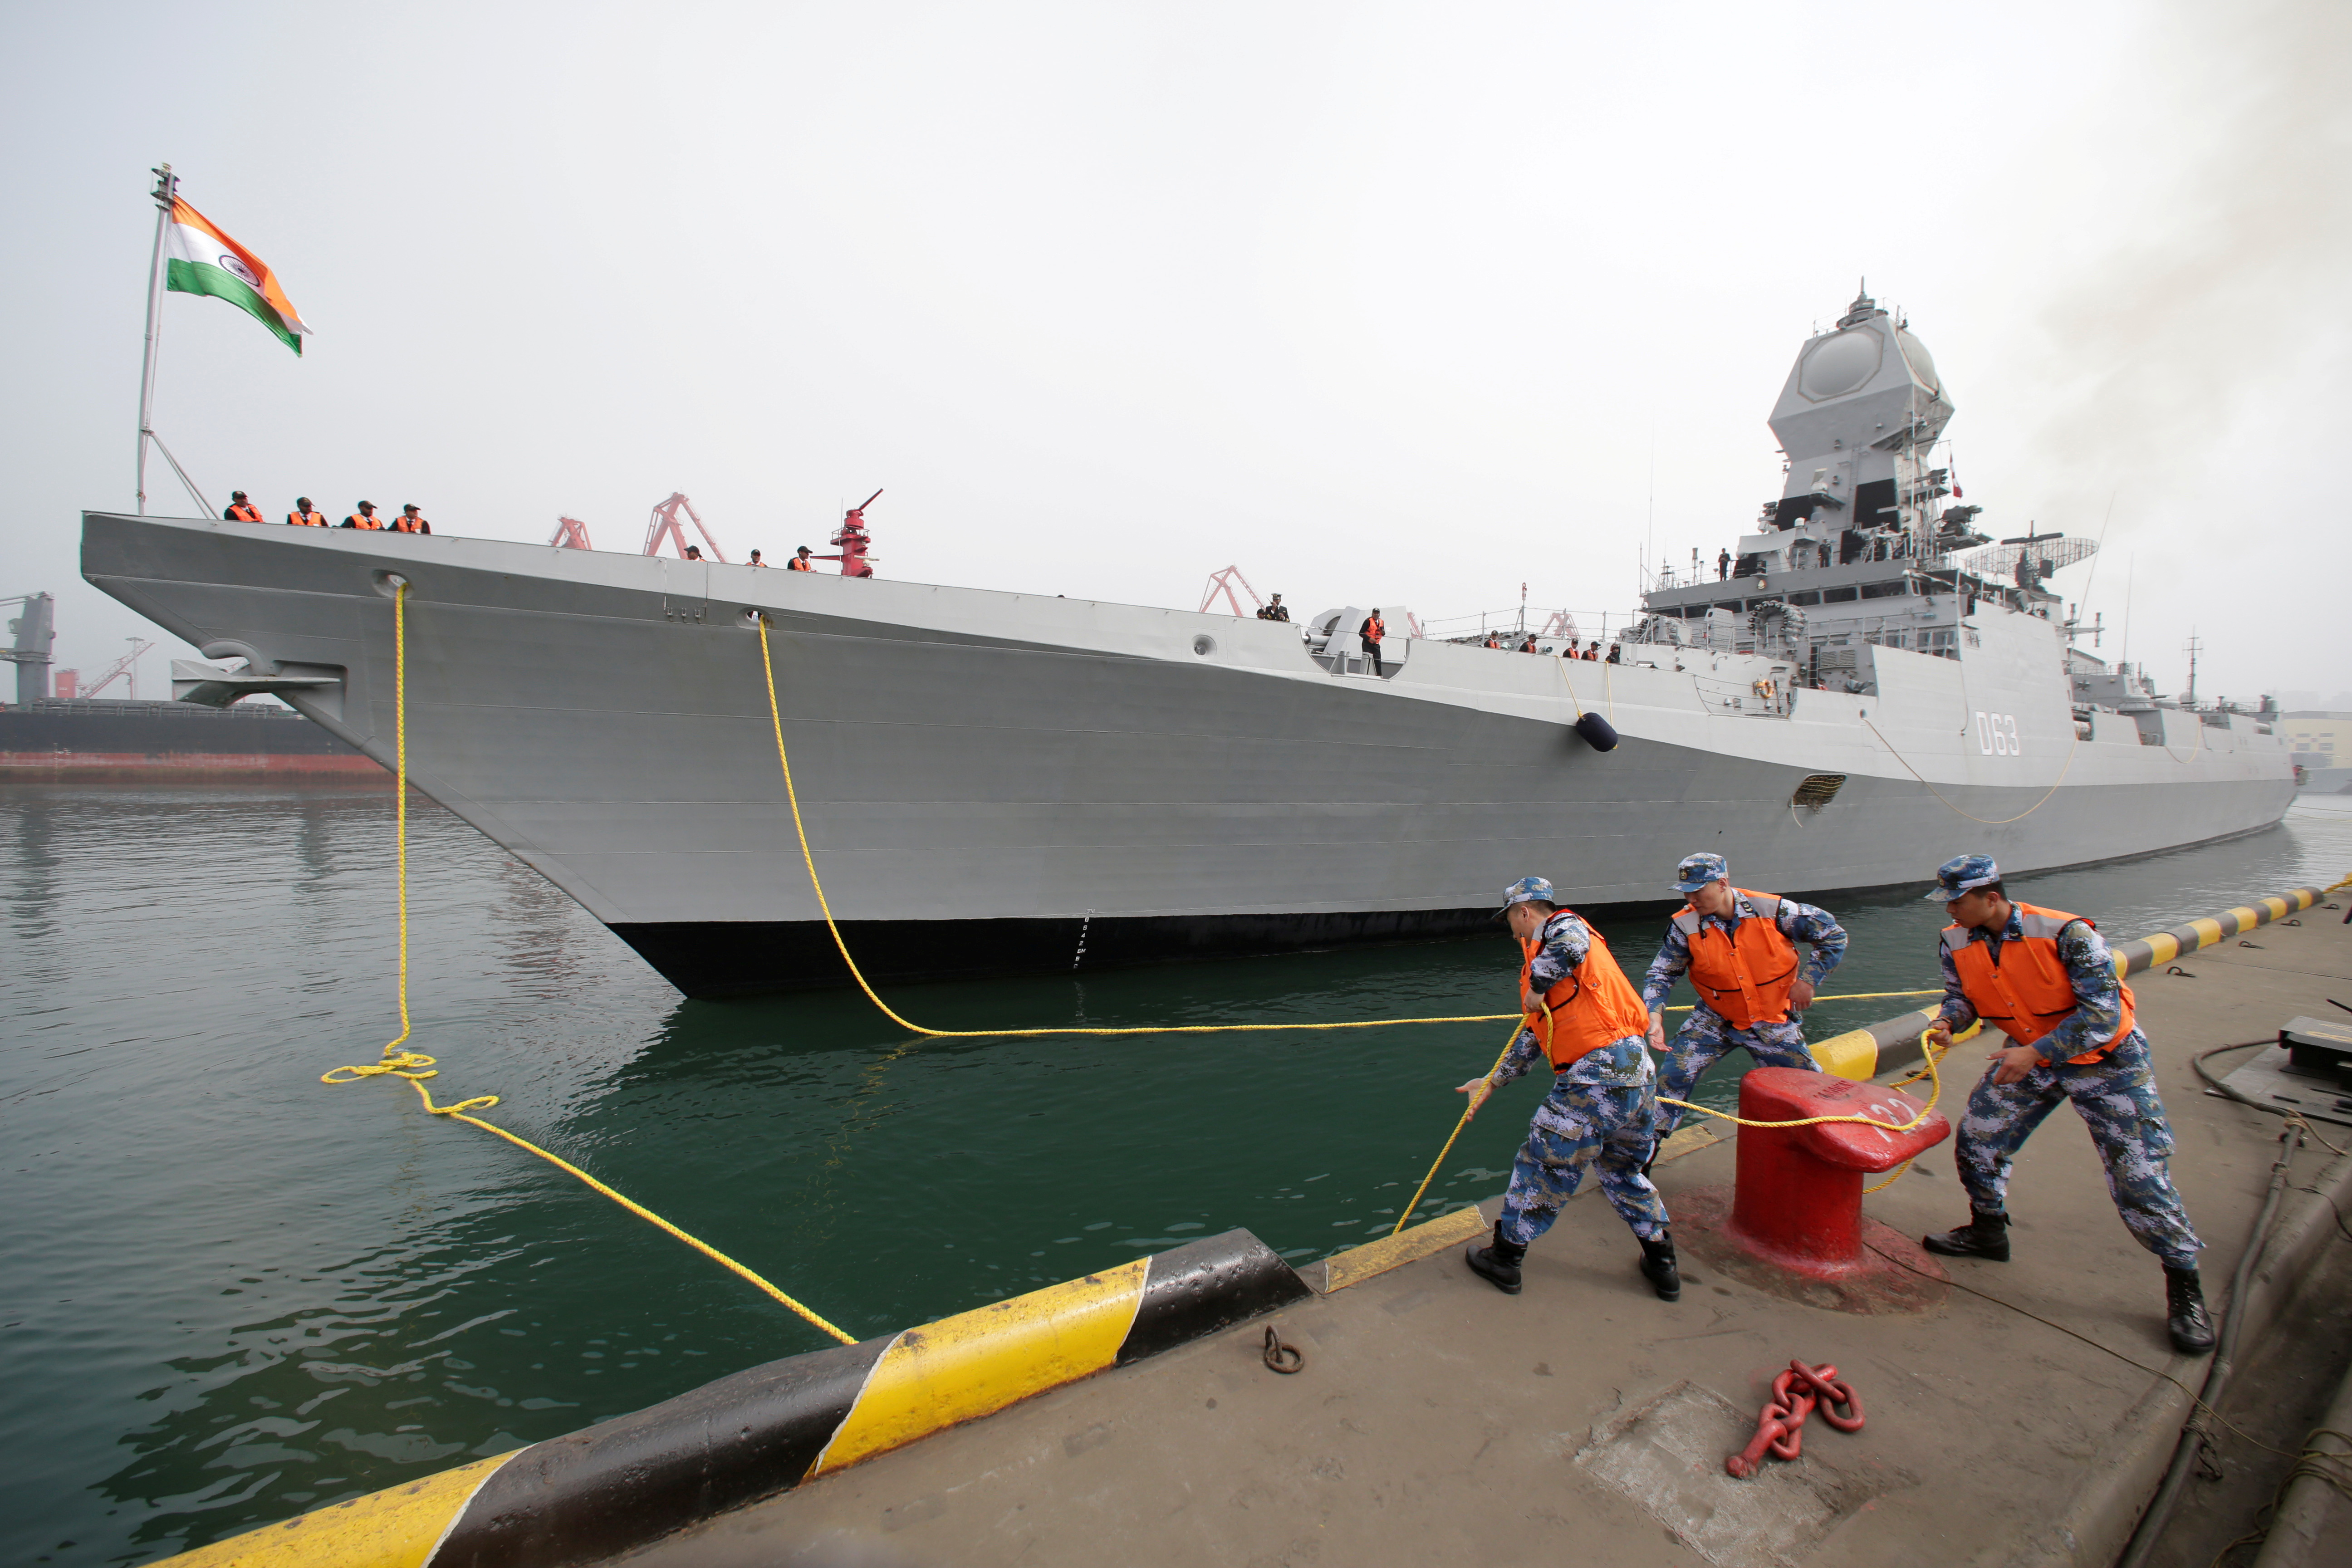 Chinese navy personnel moor the Indian Navy warship INS Kolkata at Qingdao Port for the 70th anniversary celebrations of the founding of the Chinese People's Liberation Army Navy (PLAN), in Qingdao